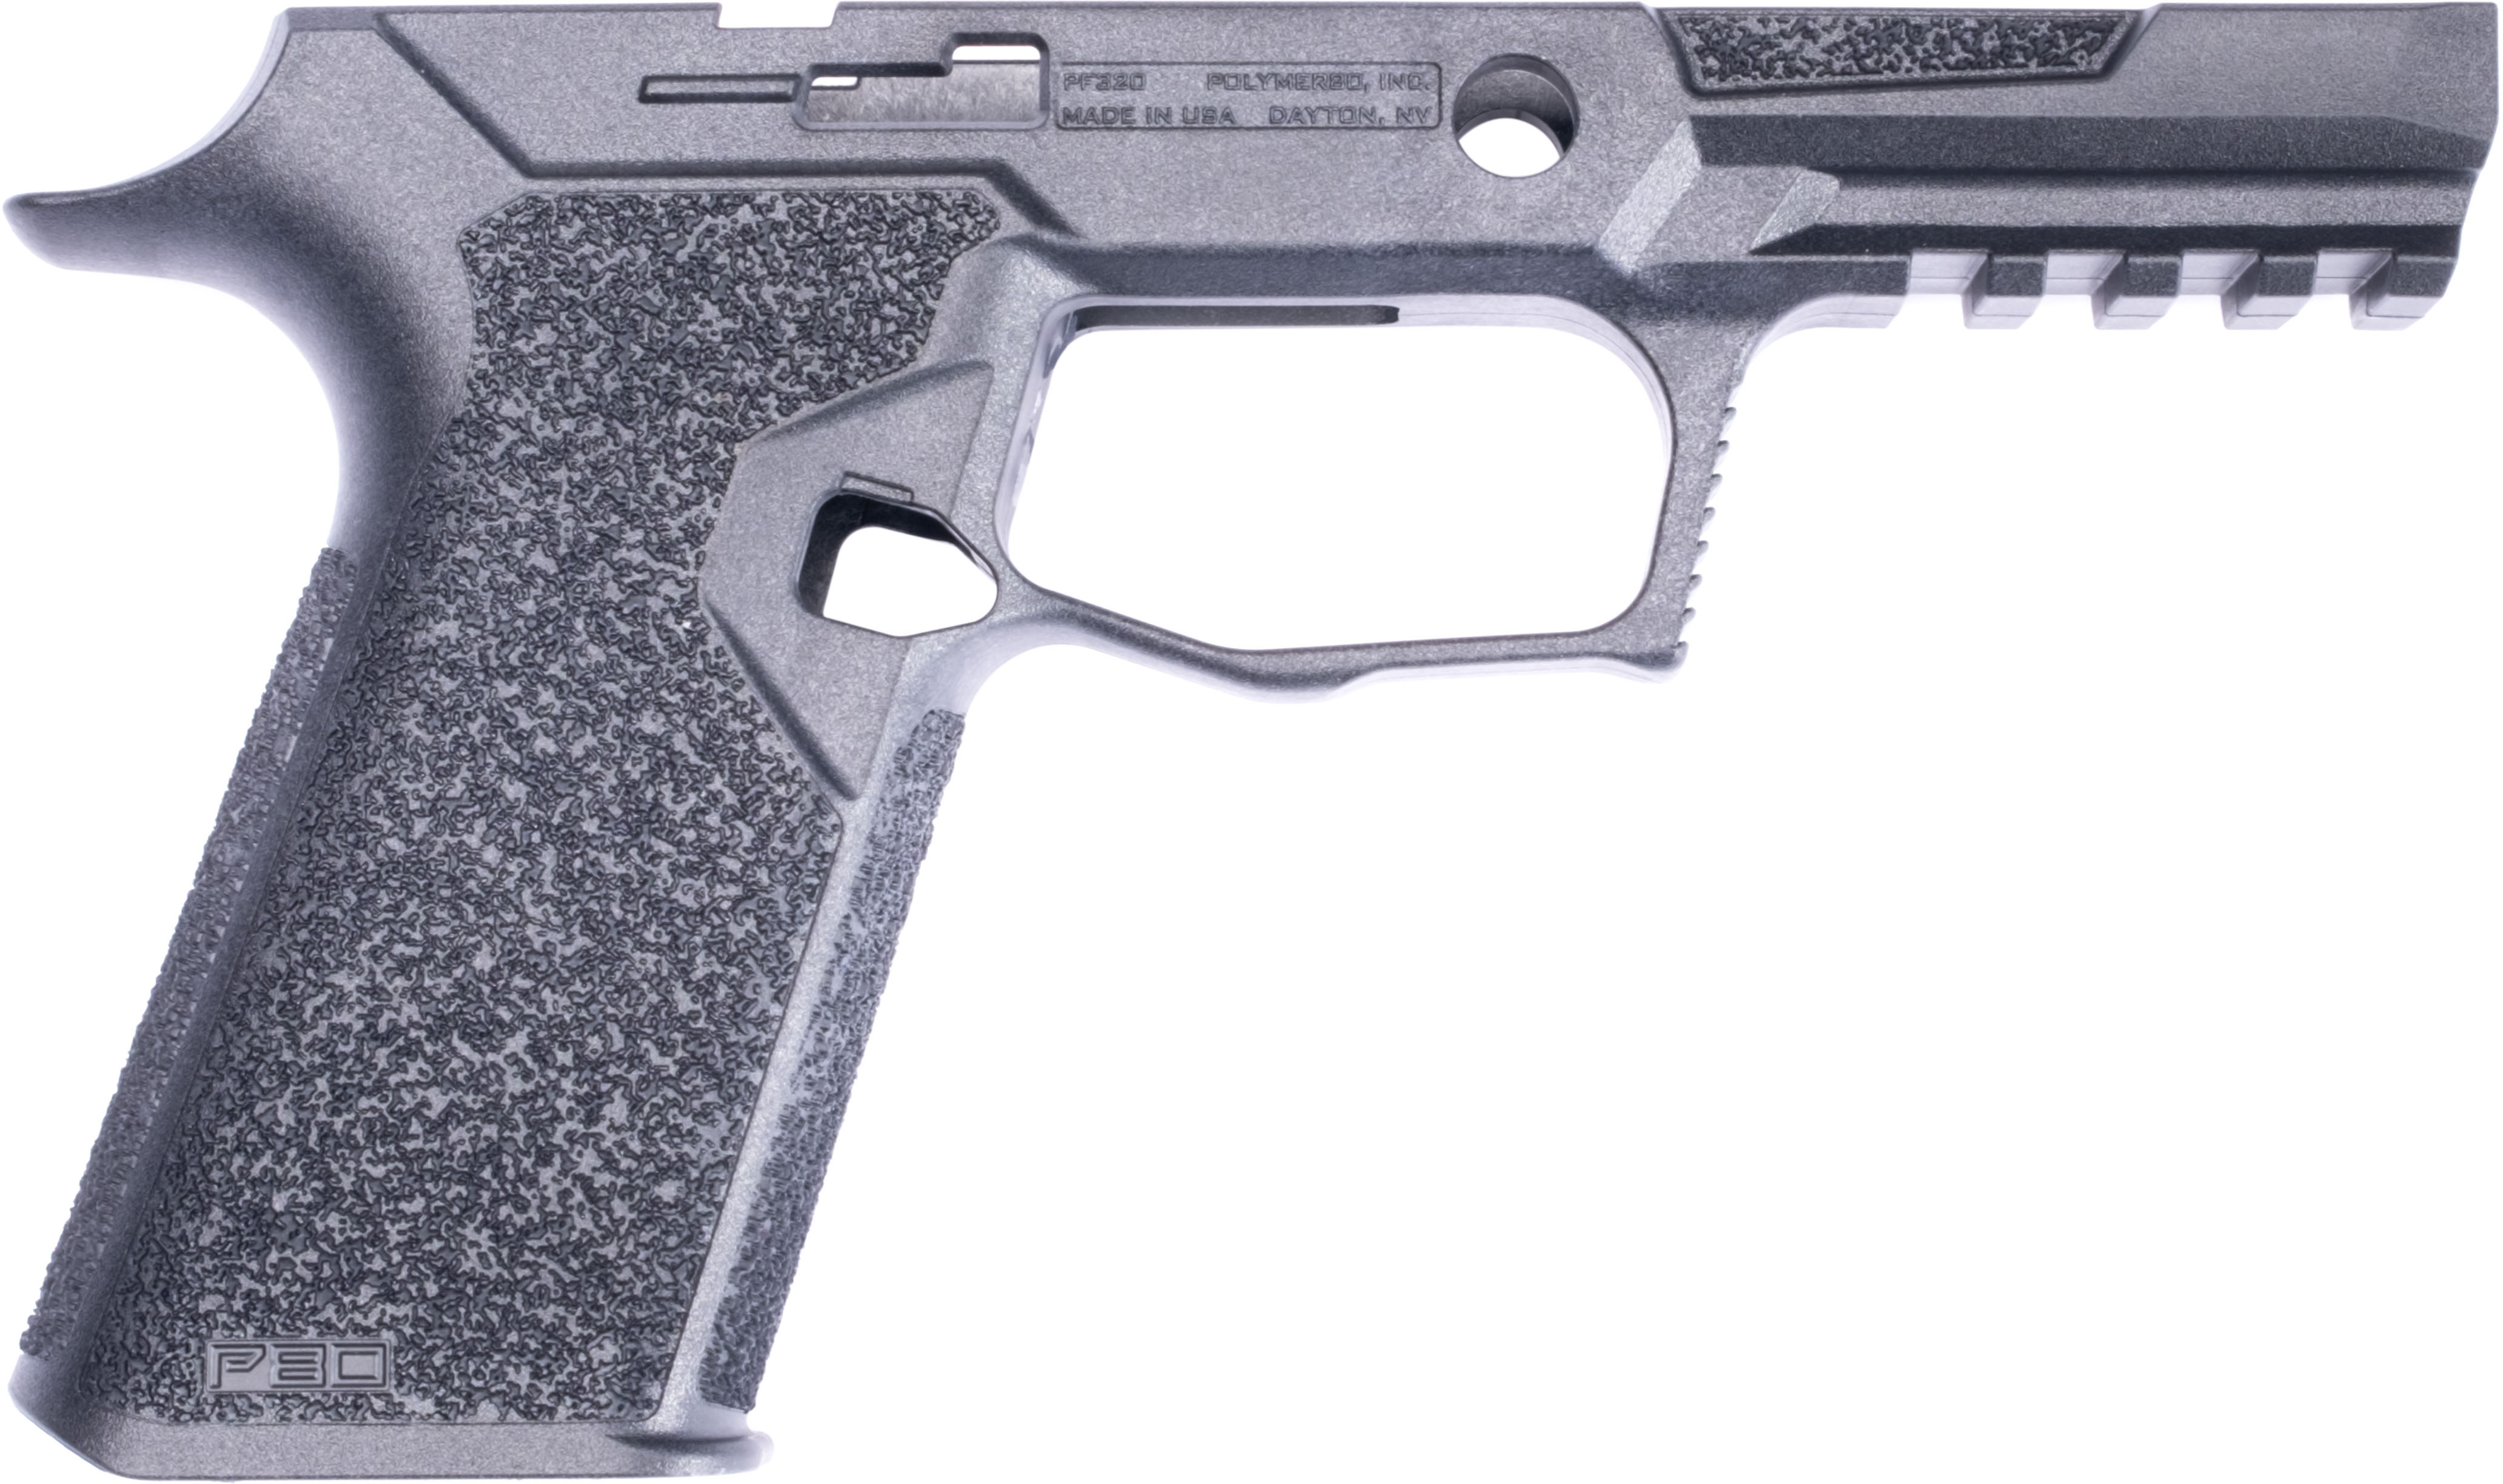 Polymer80 Pf3 Ptex Handgun Grip Modules Up To 15 Off 5 Star Rating W Free Shipping And Handling